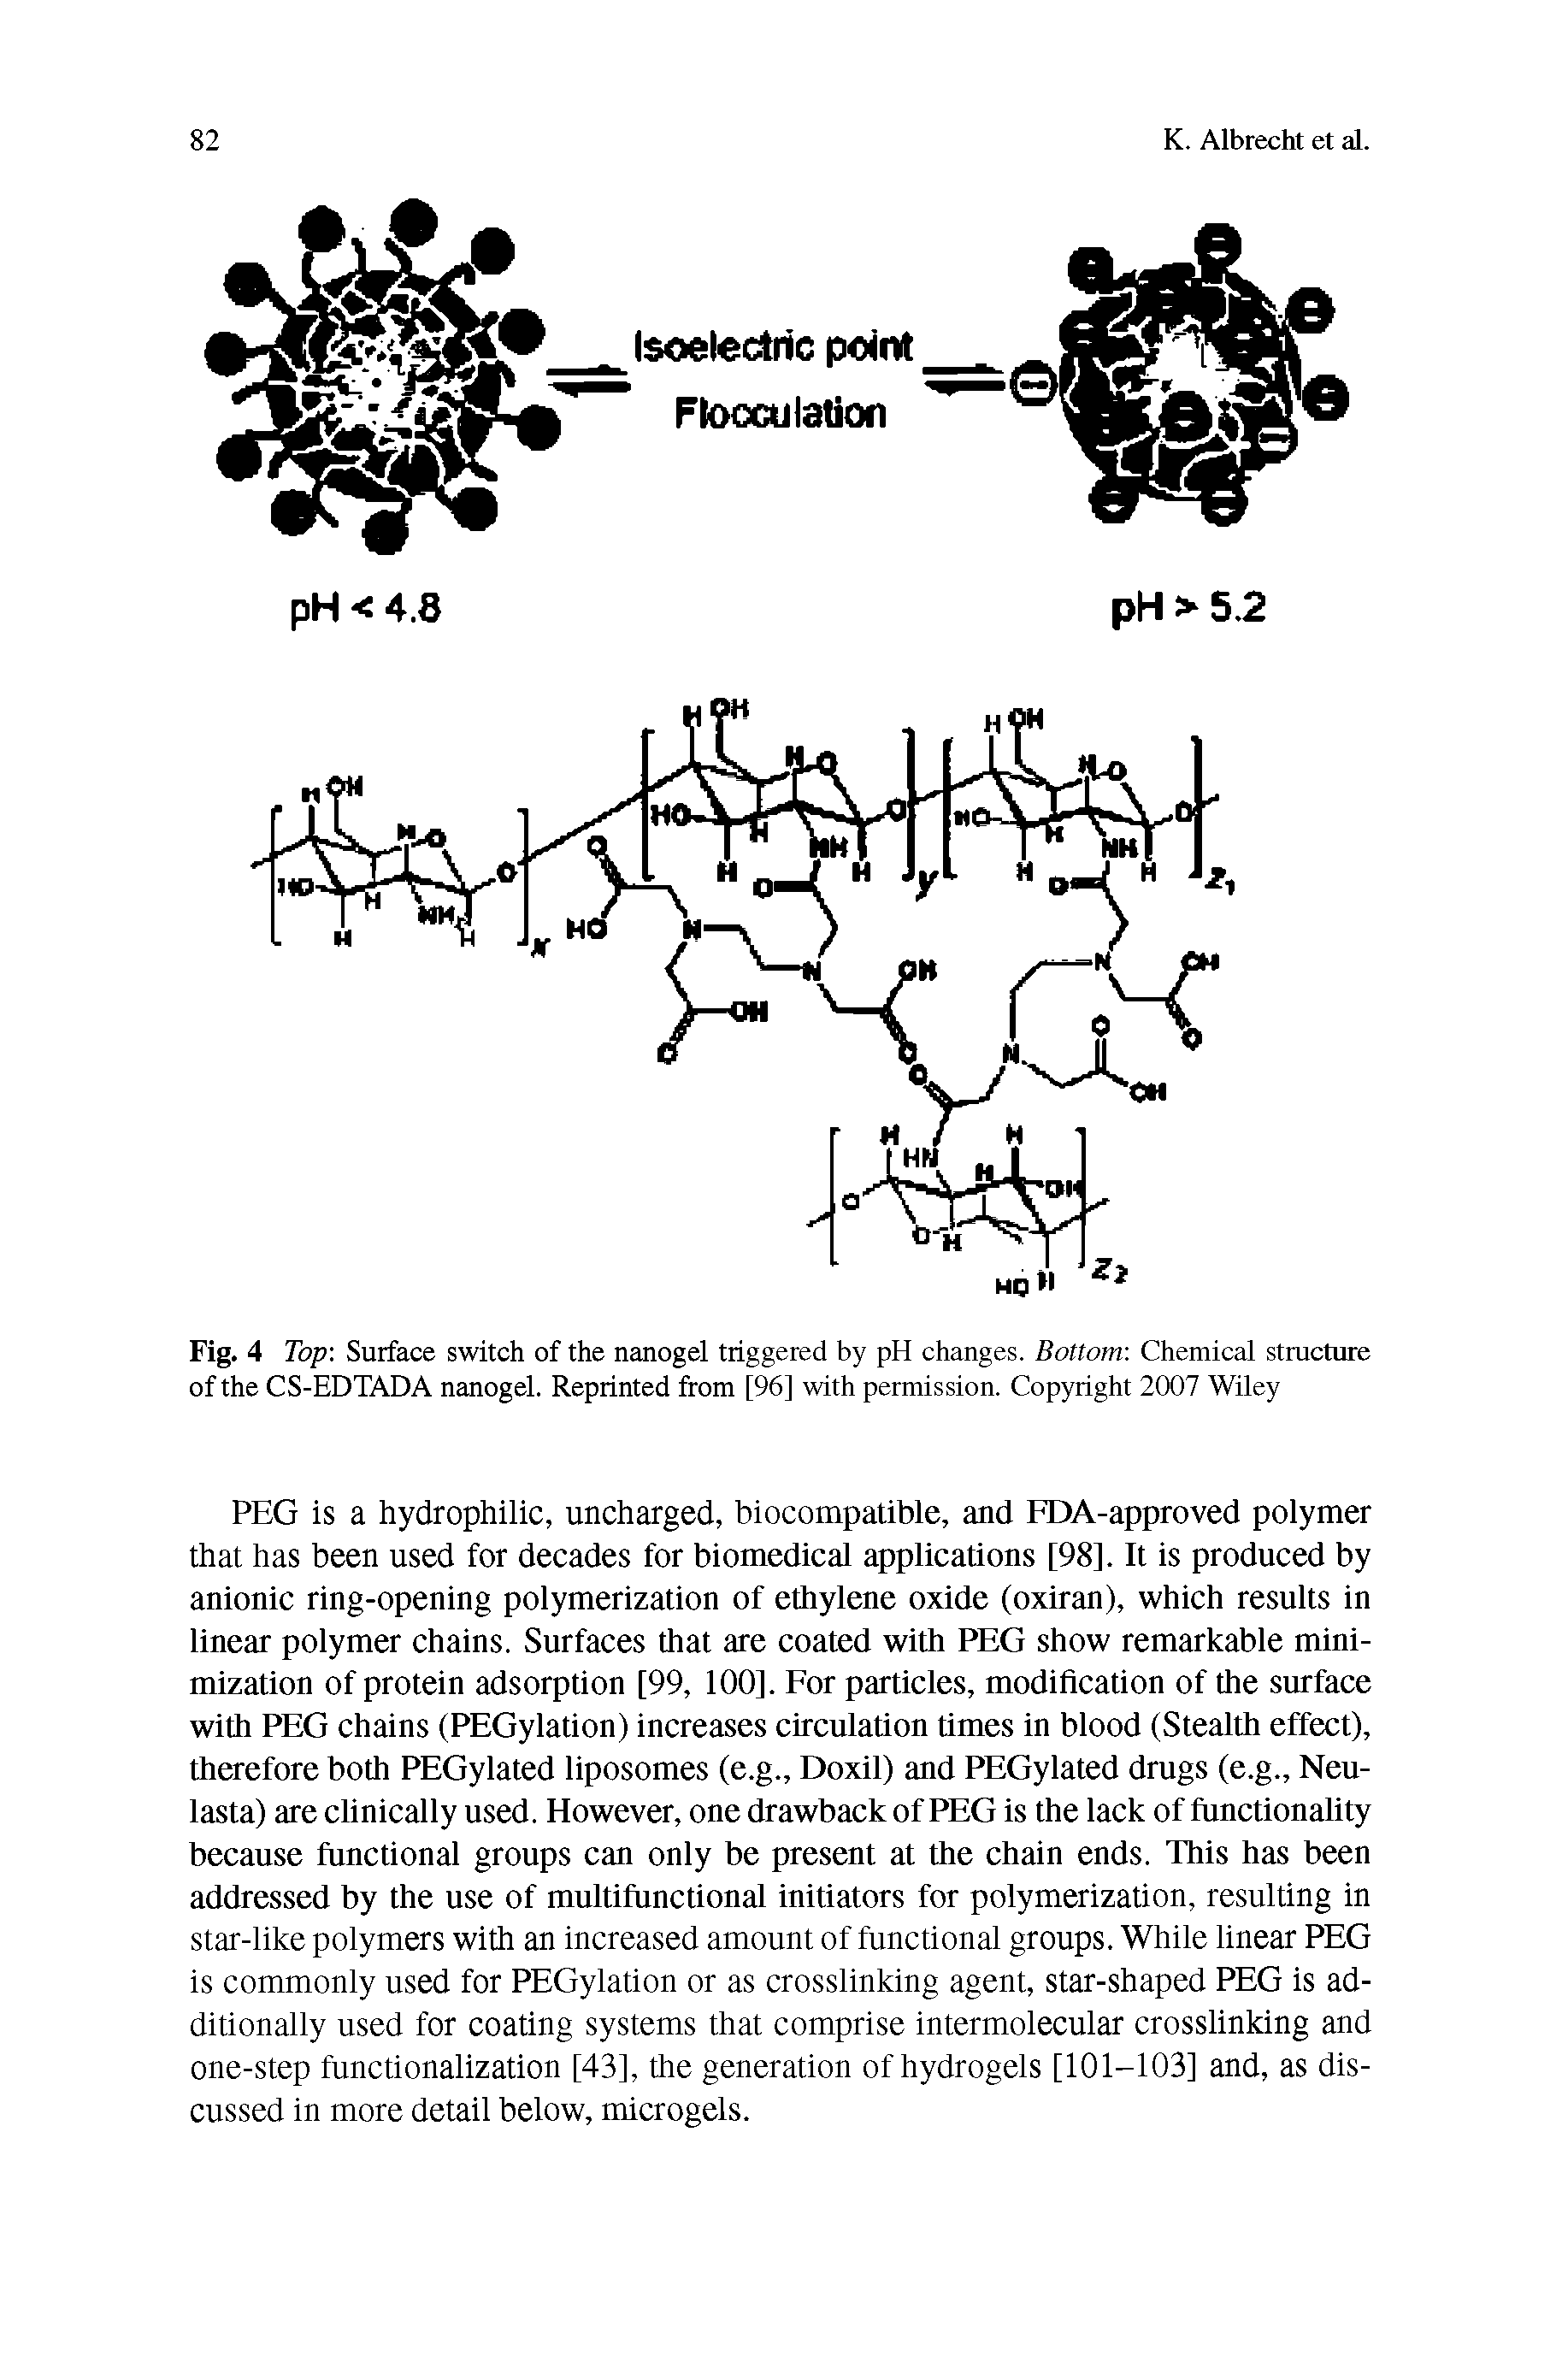 Fig. 4 Top Surface switch of the nanogel triggered by pH changes. Bottom Chemical structure of the CS-EDTADA nanogel. Reprinted from [96] with permission. Copyright 2007 Wiley...